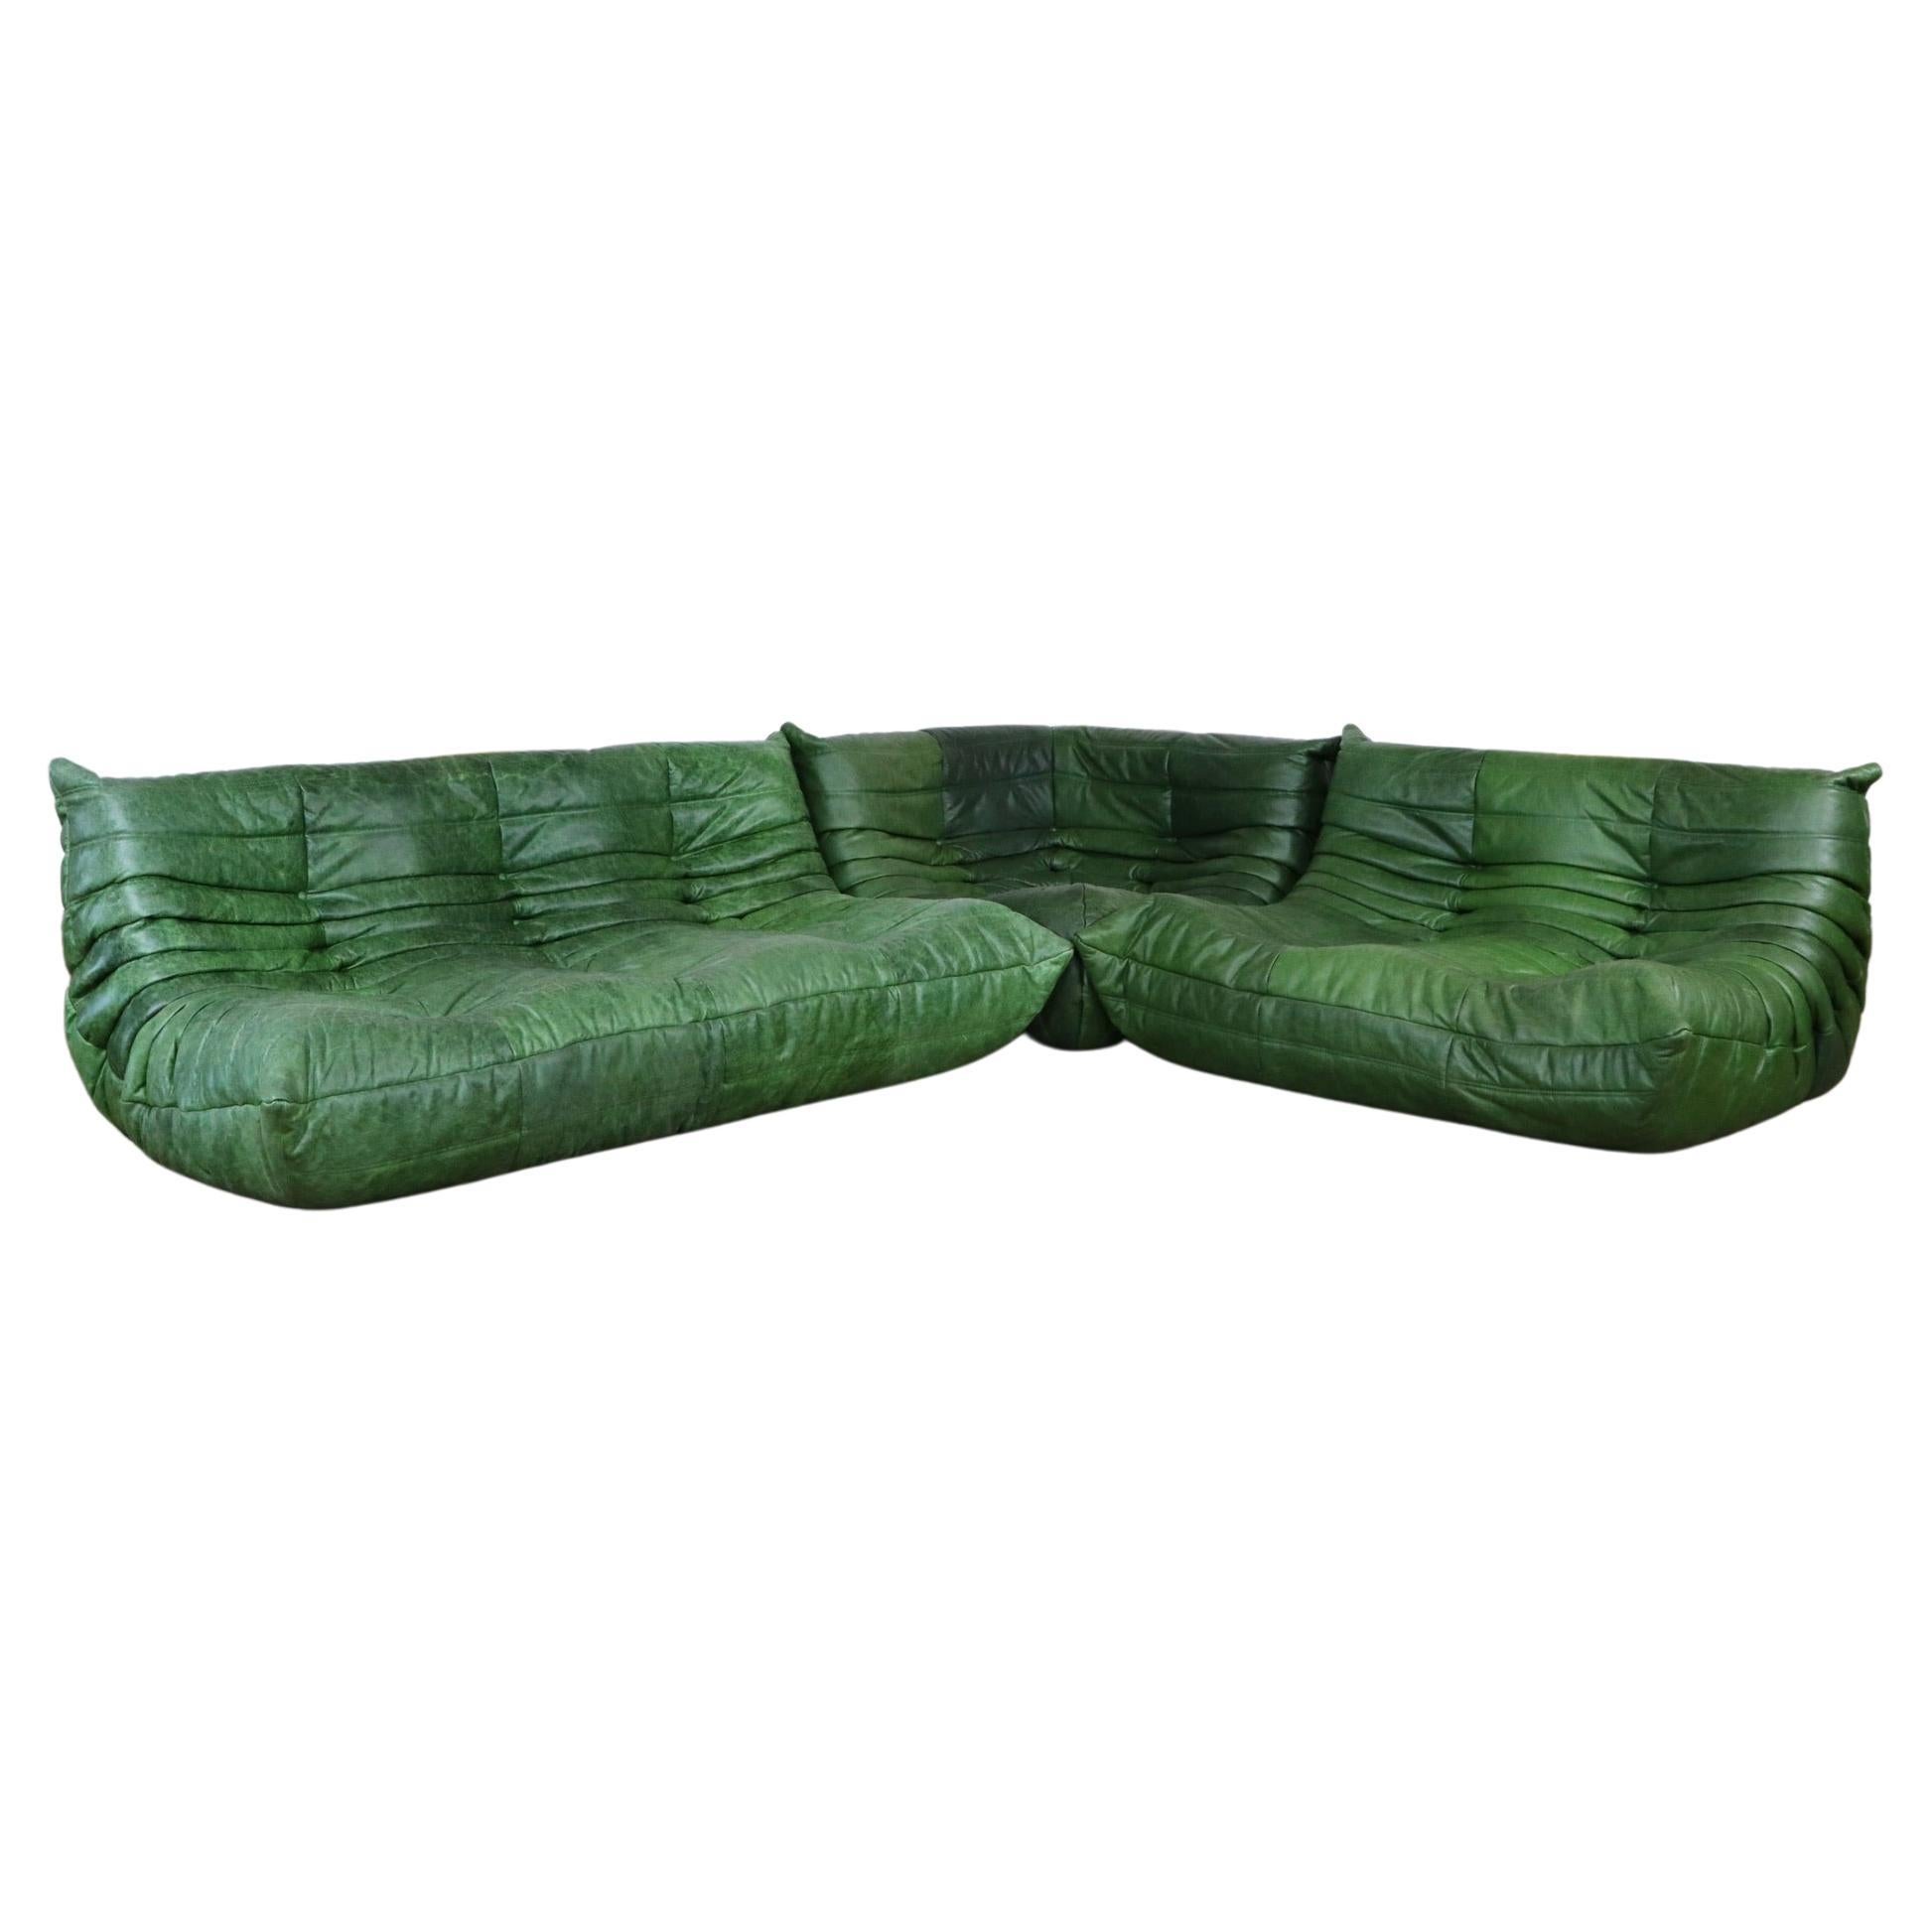 Original Togo Seating Group in Green Leather by Michel Ducaroy for Ligne Roset